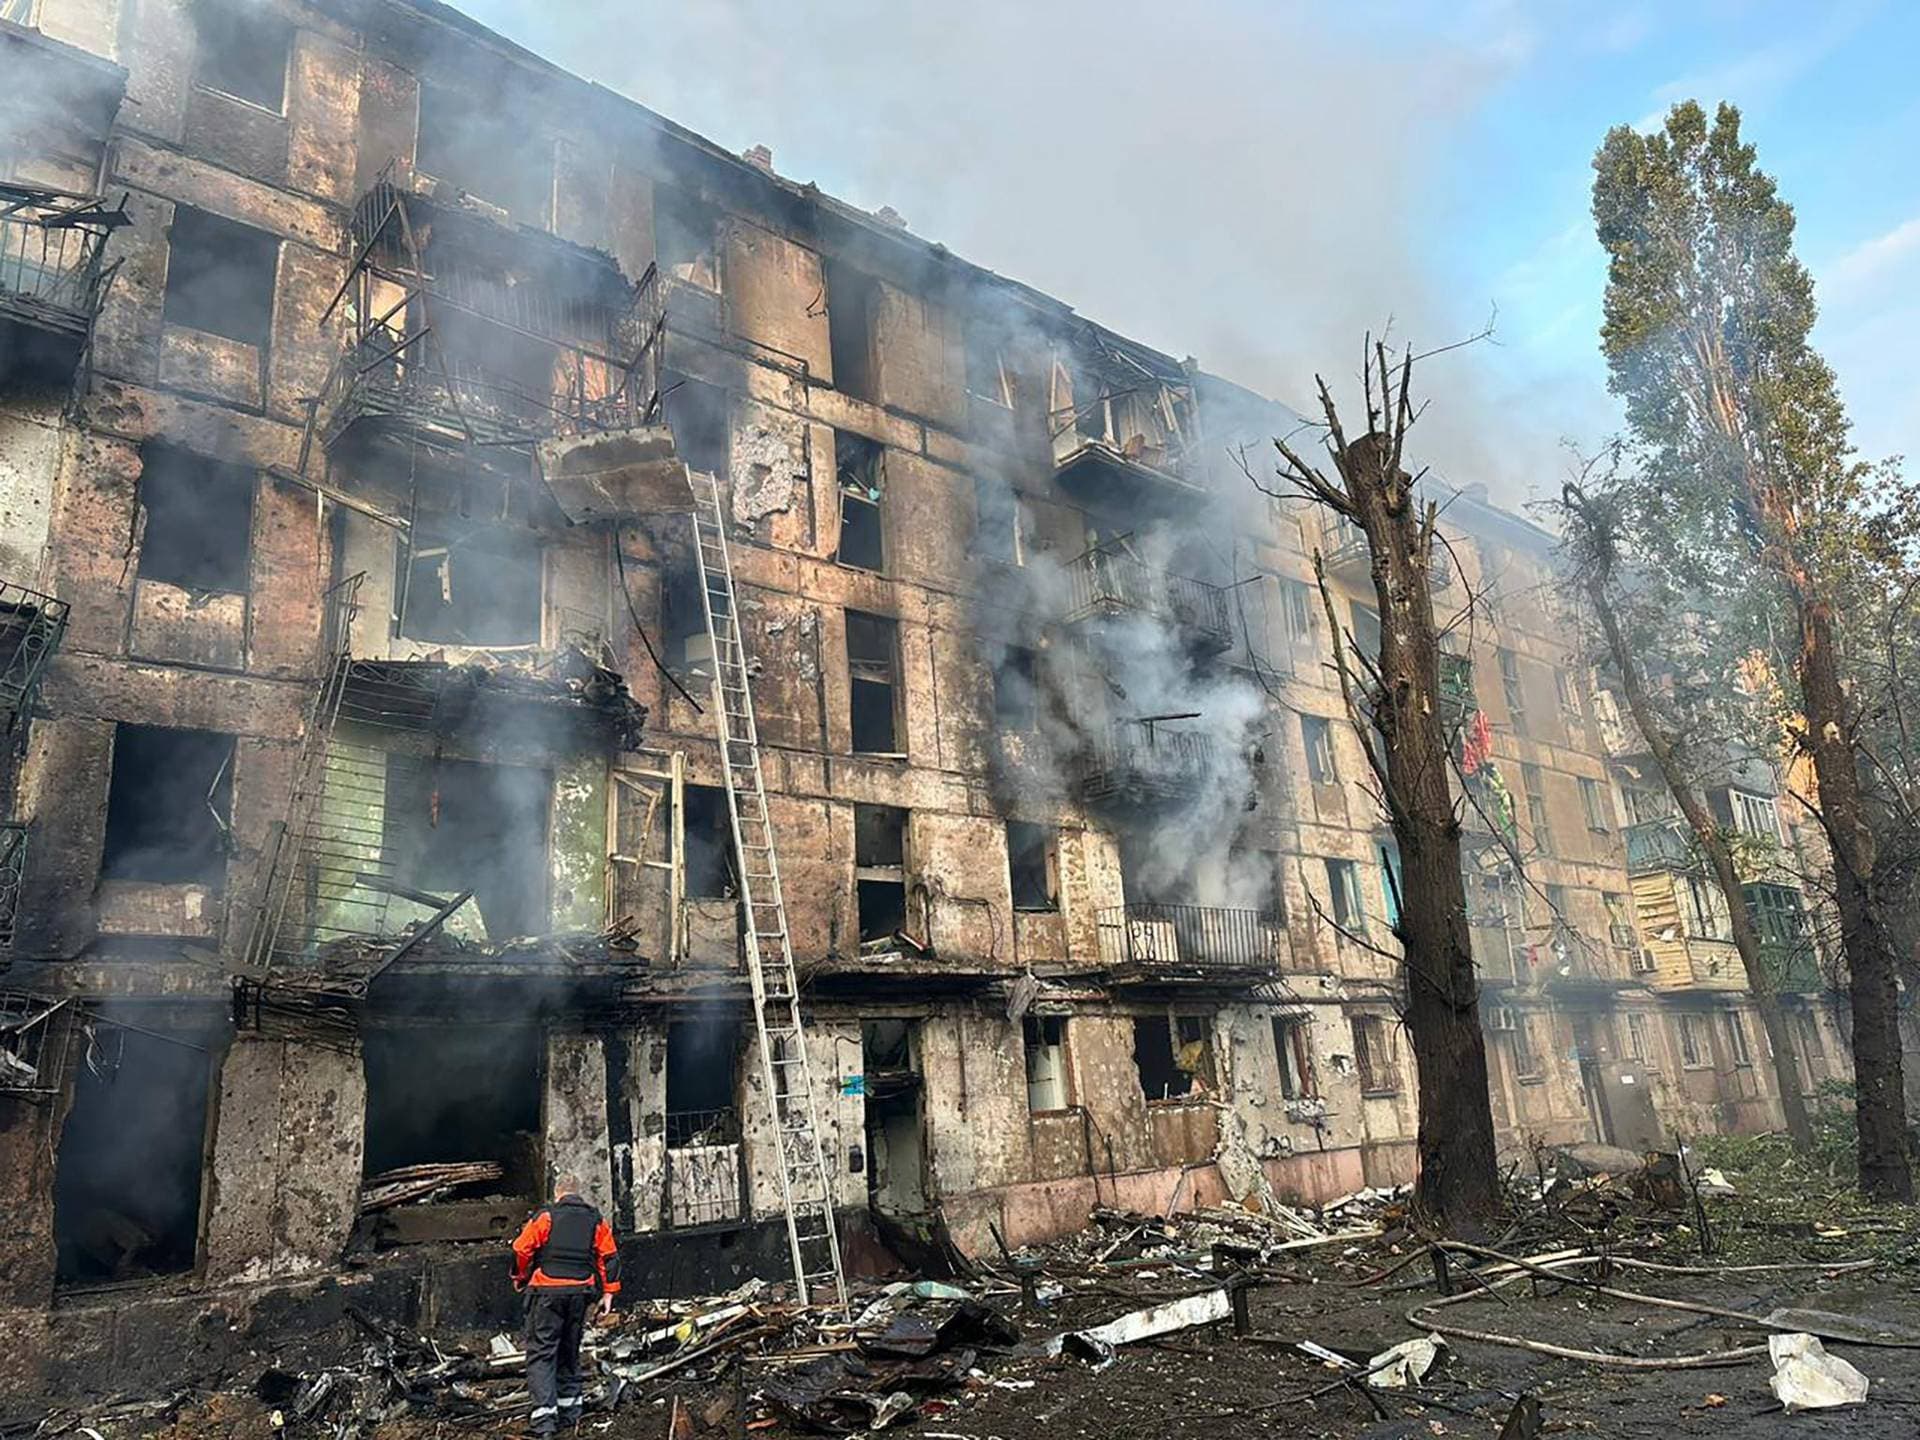 In this photo released by Dnipro Regional Administration, emergency workers extinguish a fire after missiles hit a multi-story apartment building in Kryvyi Rih, Ukraine, Tuesday, June 13, 2023.